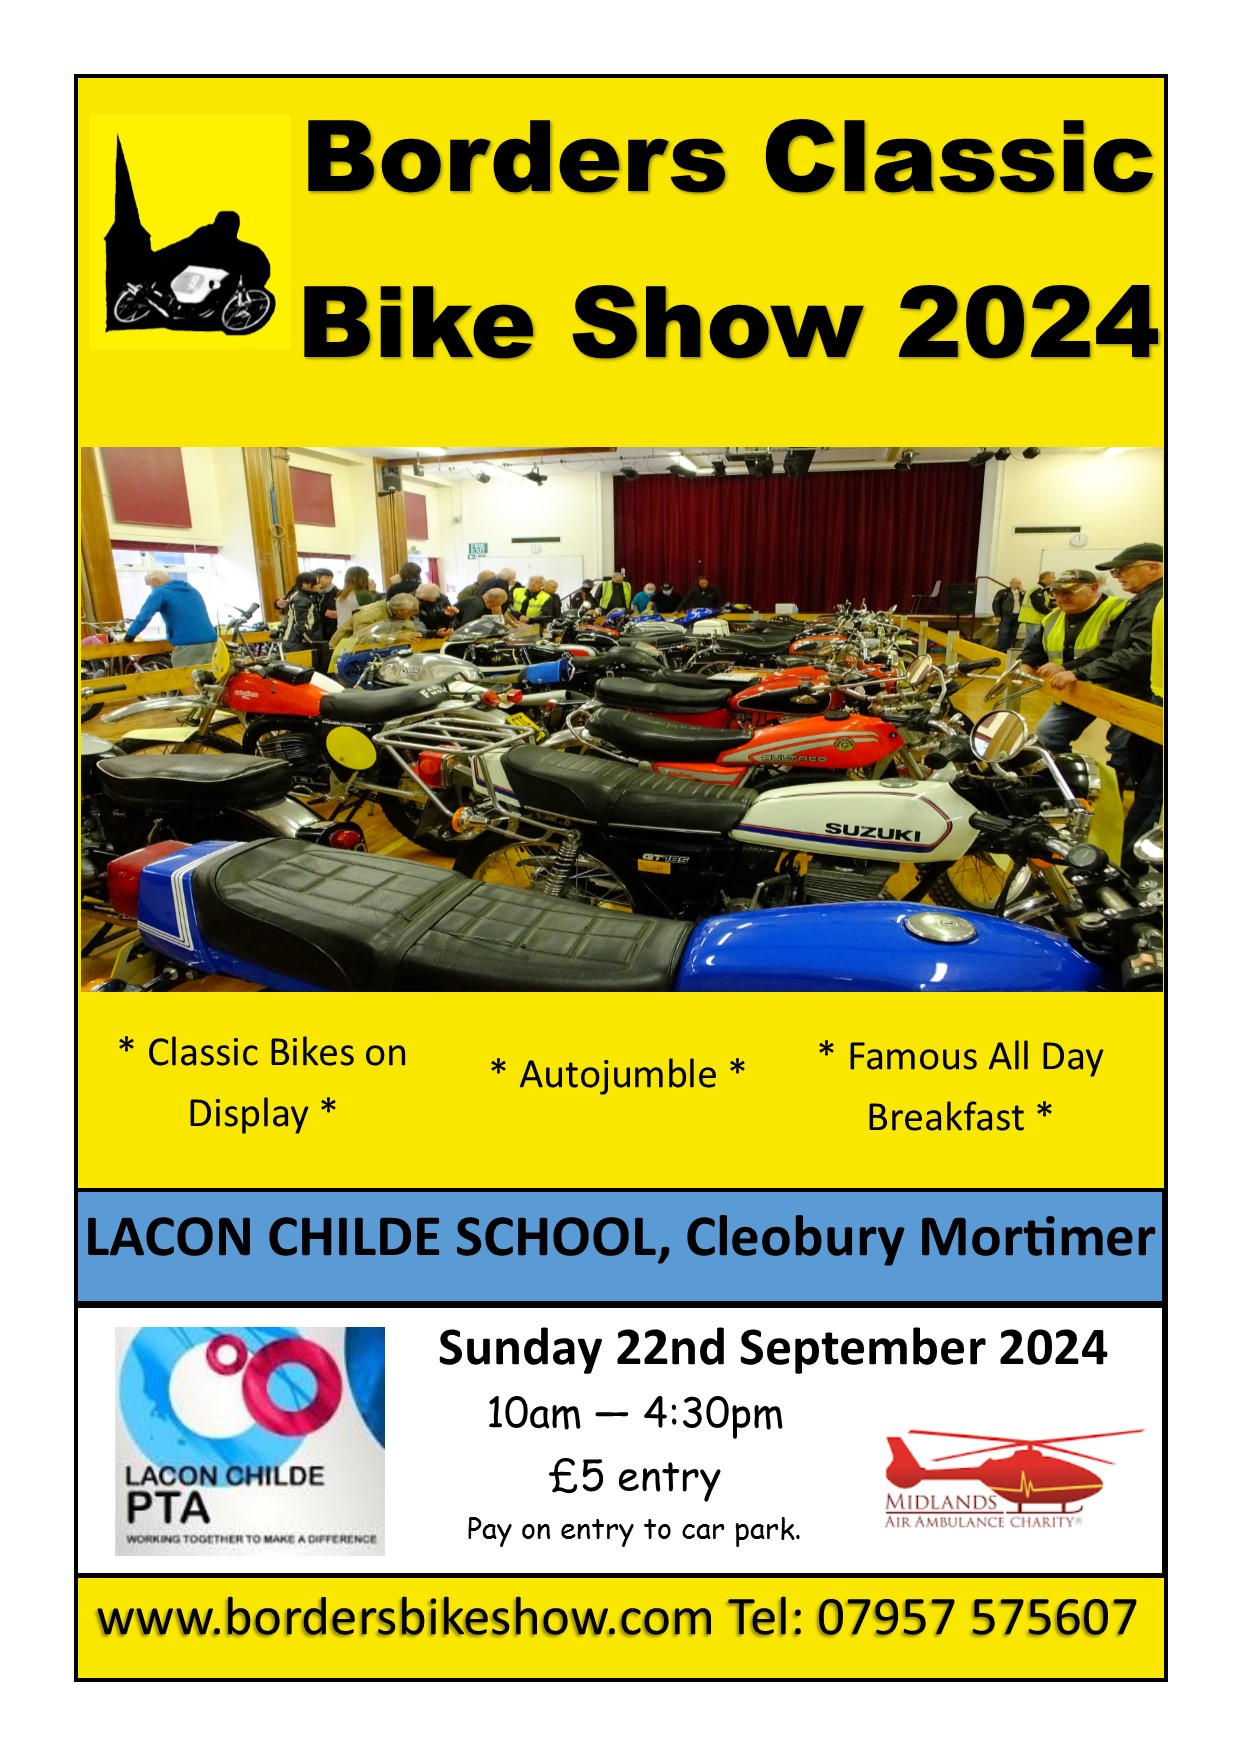 Thank you for all of your support. We raised £3800 for the school and air ambulance!! Save the date - 22/09/24 - for next years show.